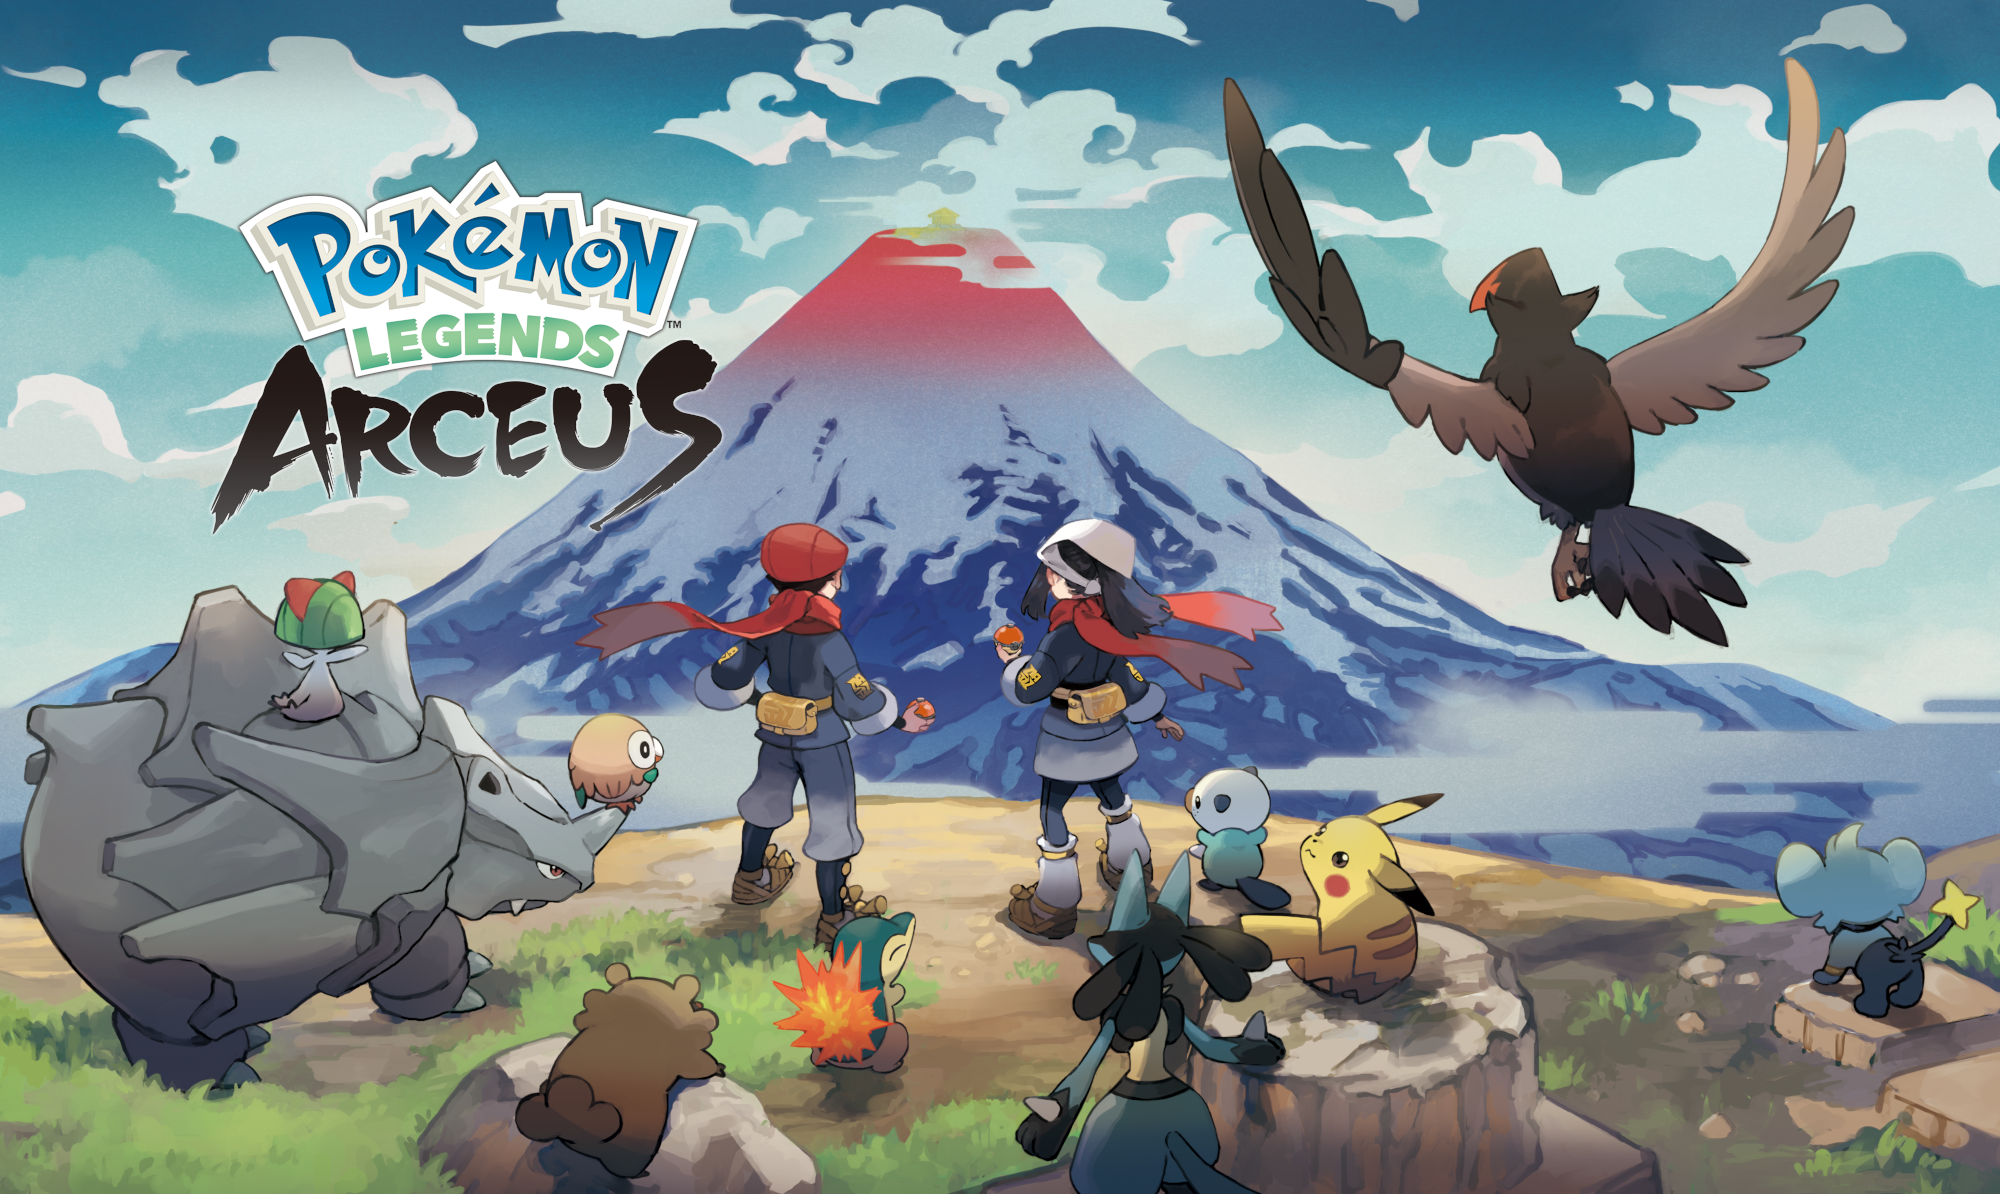 Key art for 'Pokémon Legends: Arceus,' which shows two trainers surrounded by Pokémon and looking at a mountain in the distance